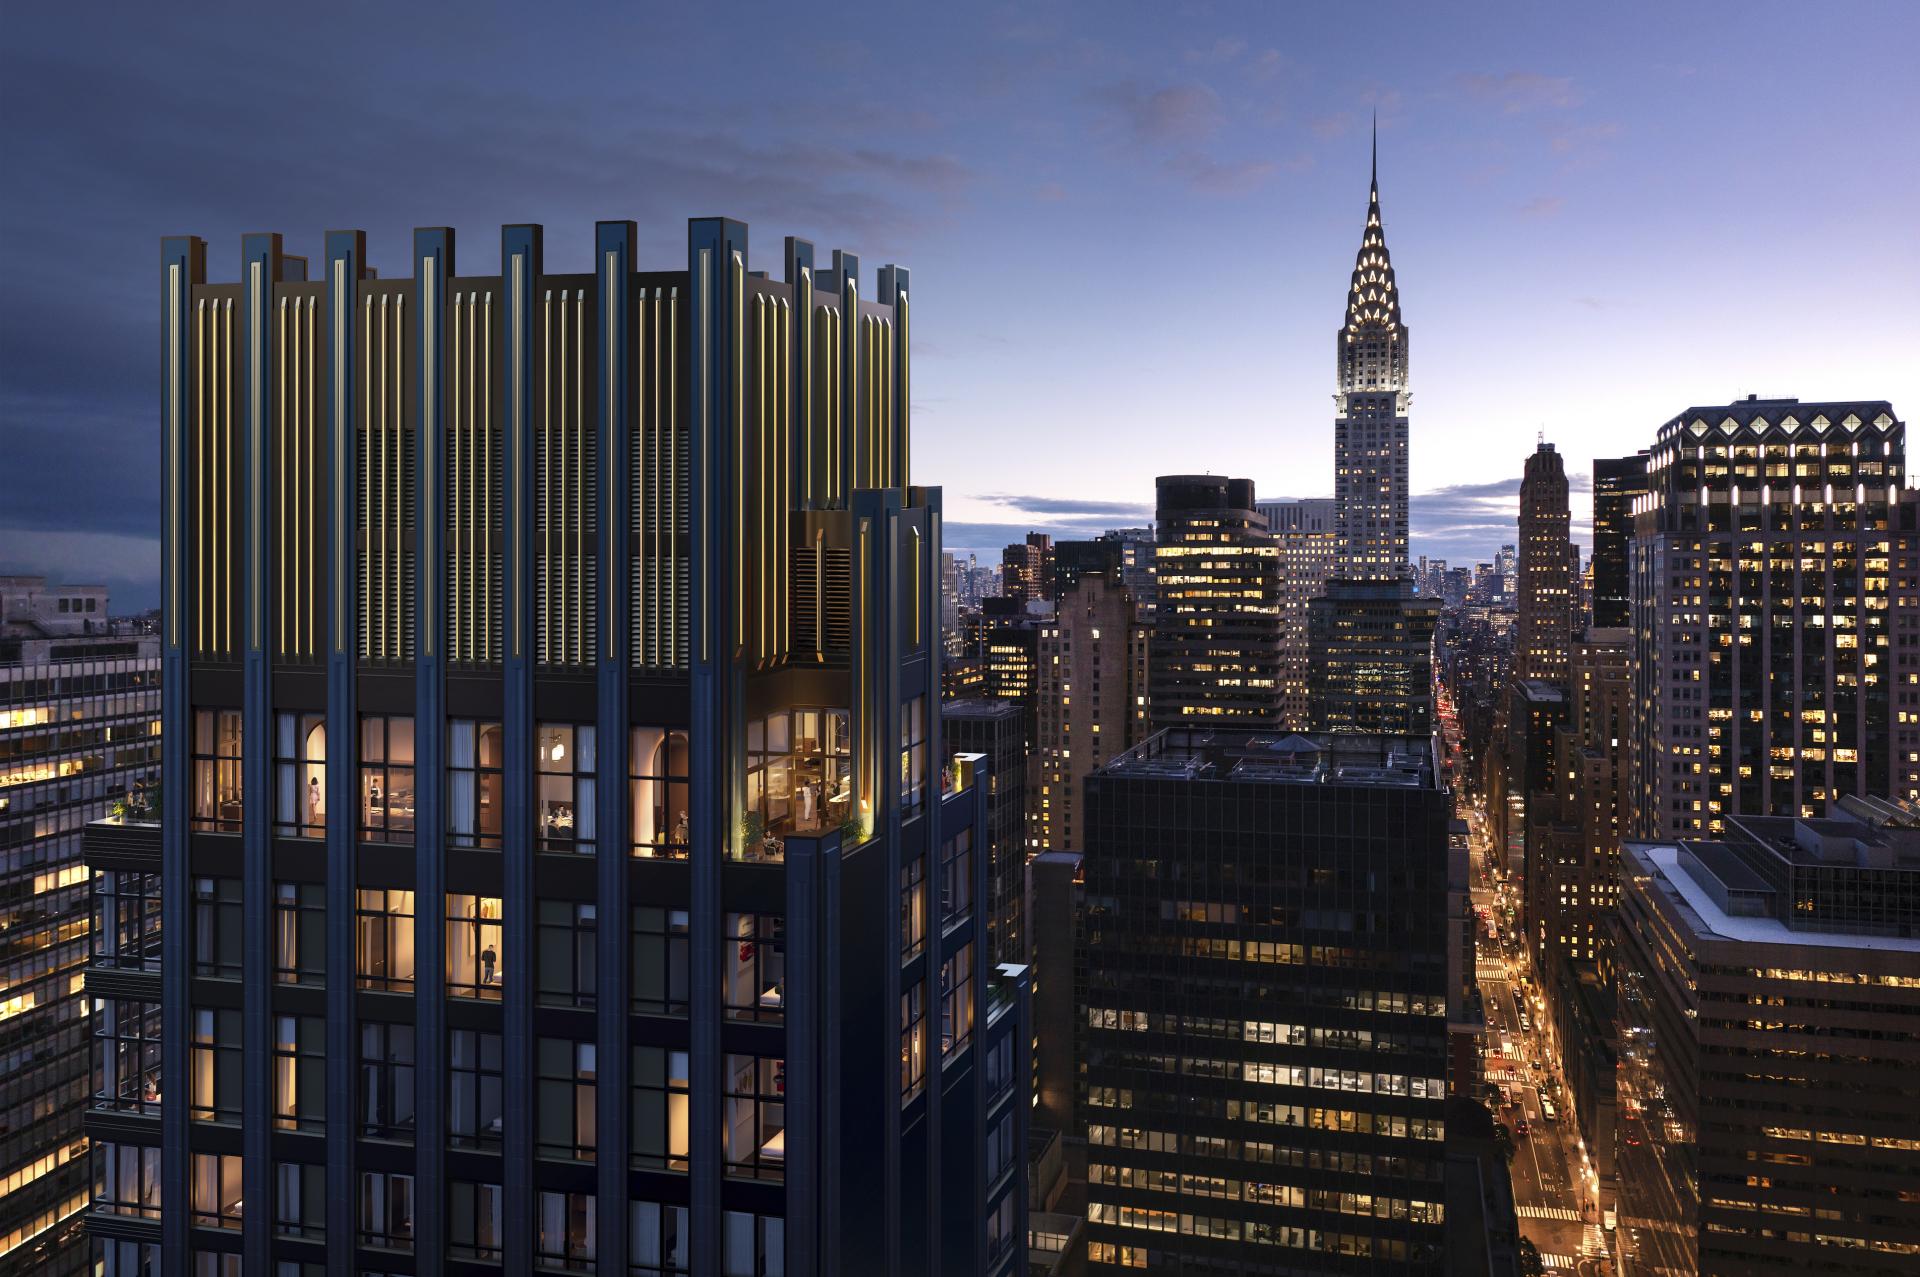 Monogram New York by Shanghai Design Firm Nears Completion with US$882,000 Homes